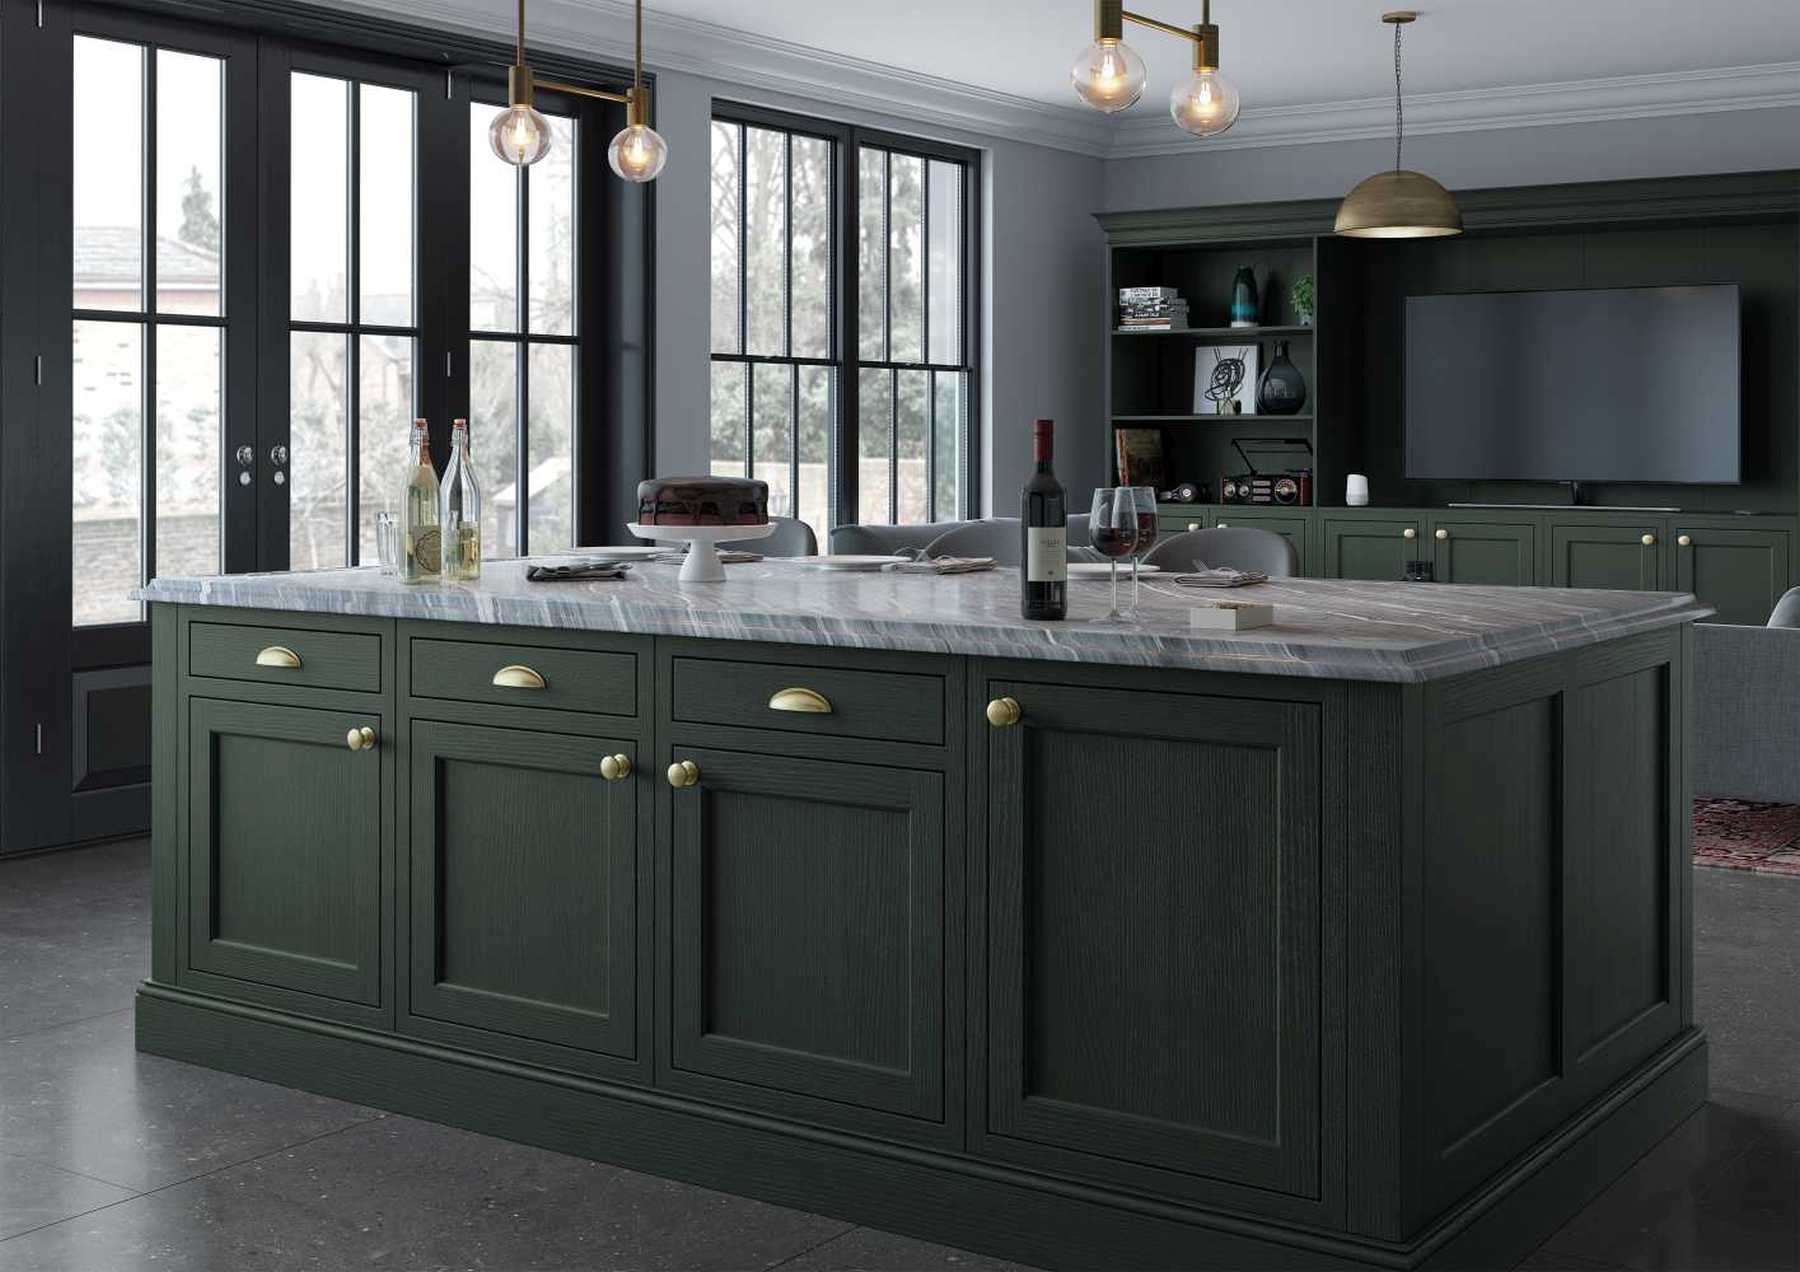 Luxurious inframe kitchen in forest green island pic 1